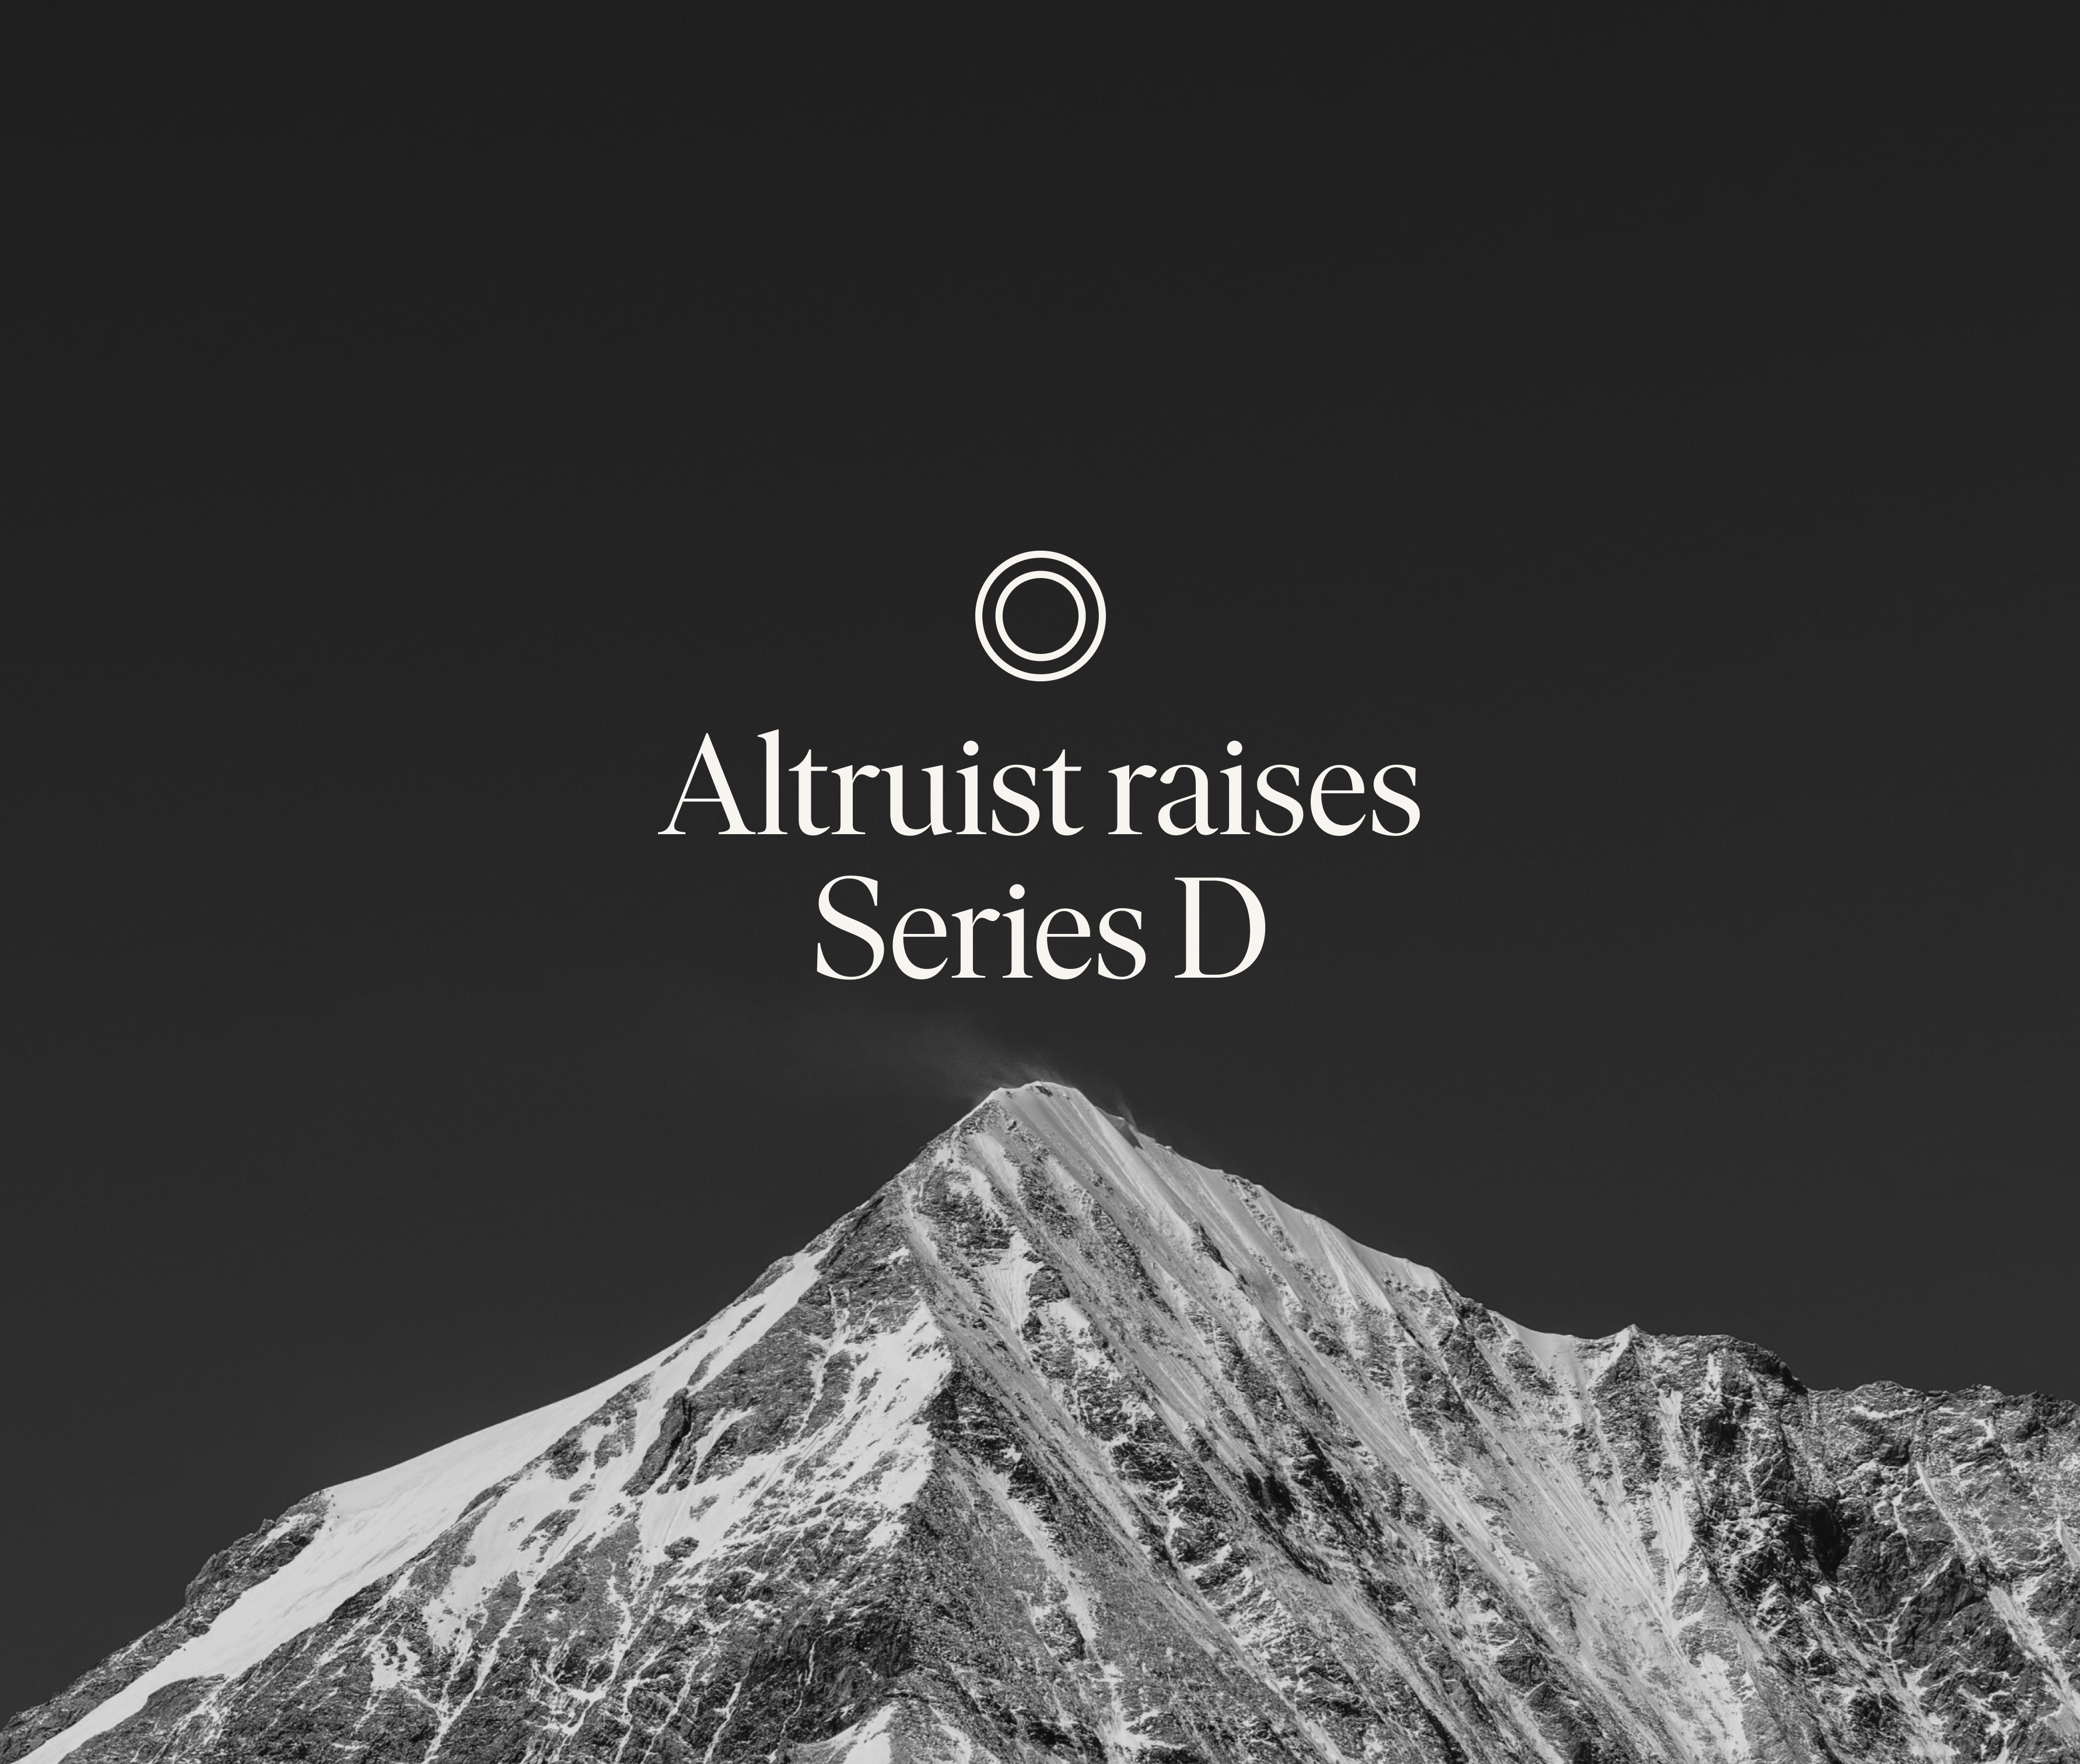 Altruist raises $112m to empower RIAs of any size and scale